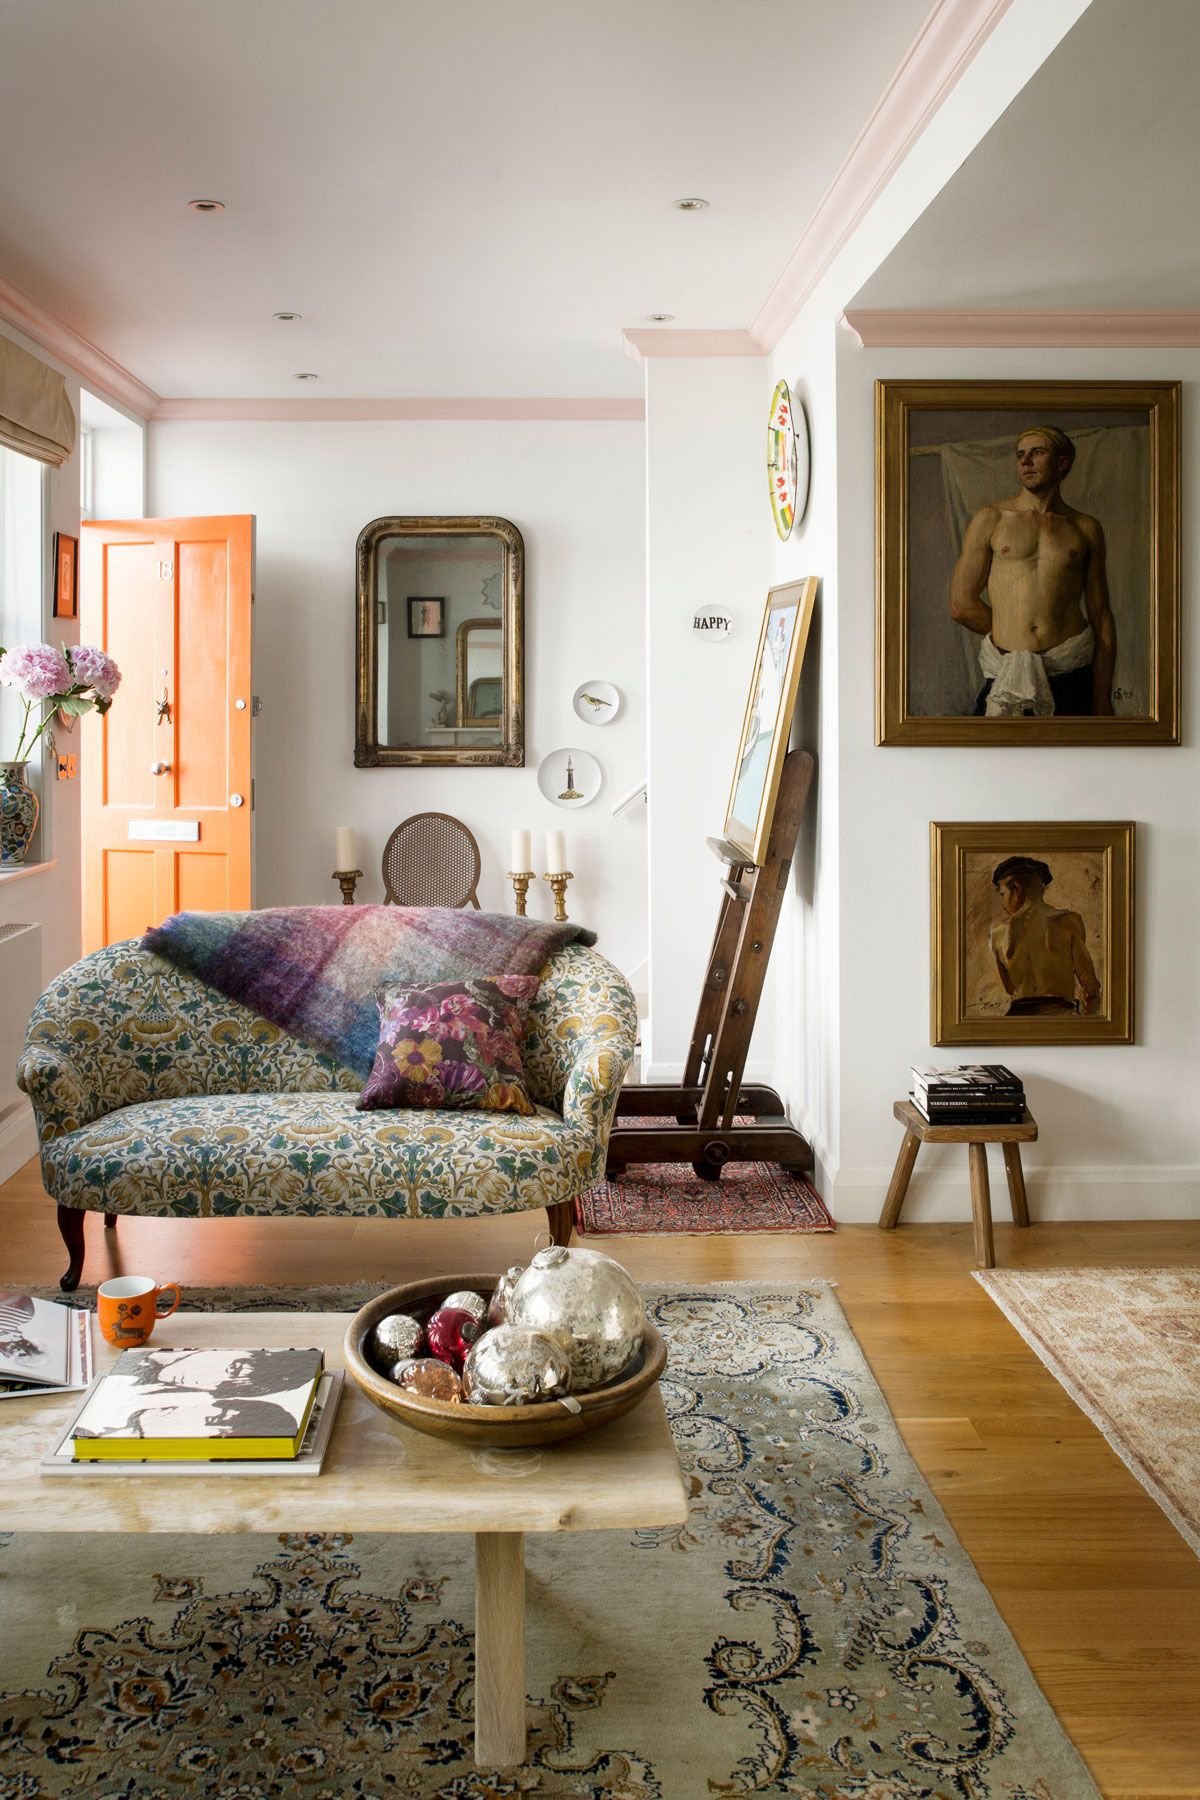 This arty London mews house boasts burst of colour and print inspired by Liberty of London